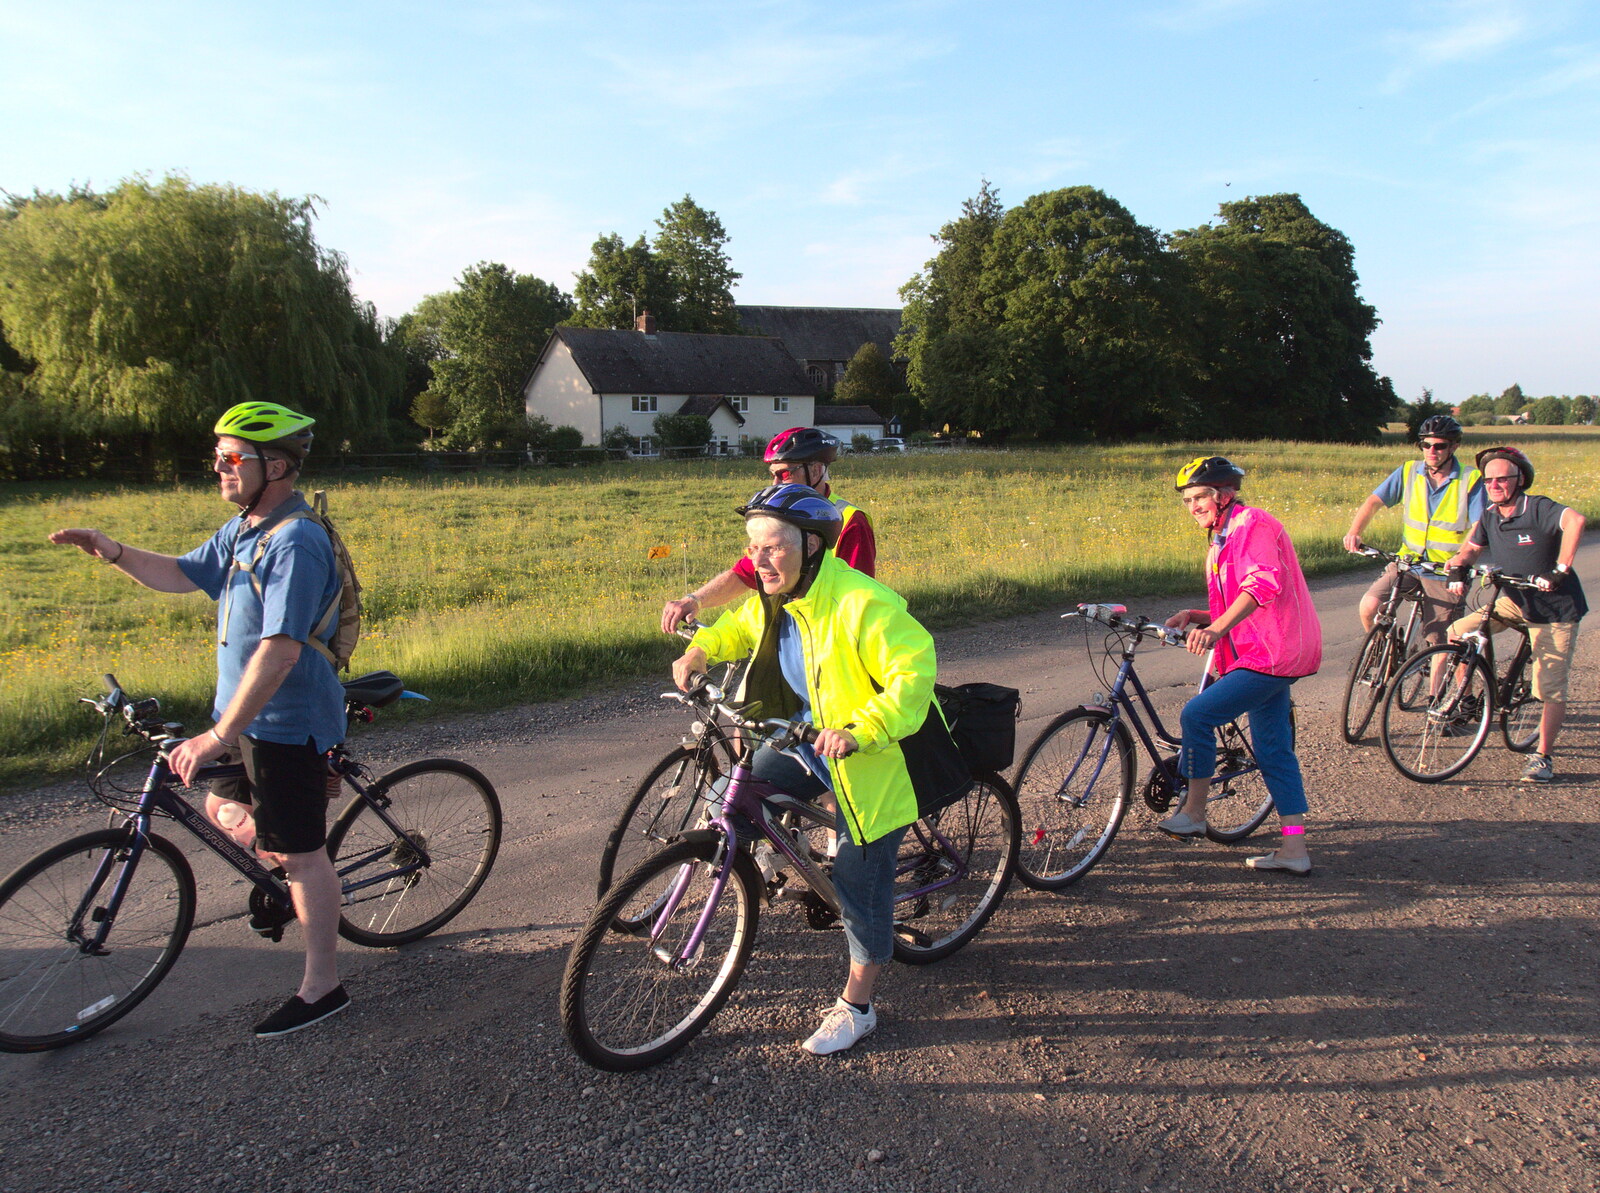 The group pauses to let some traffic past from The BSCC Rides to the Six Bells, Gislingham, Suffolk - 1st June 2017